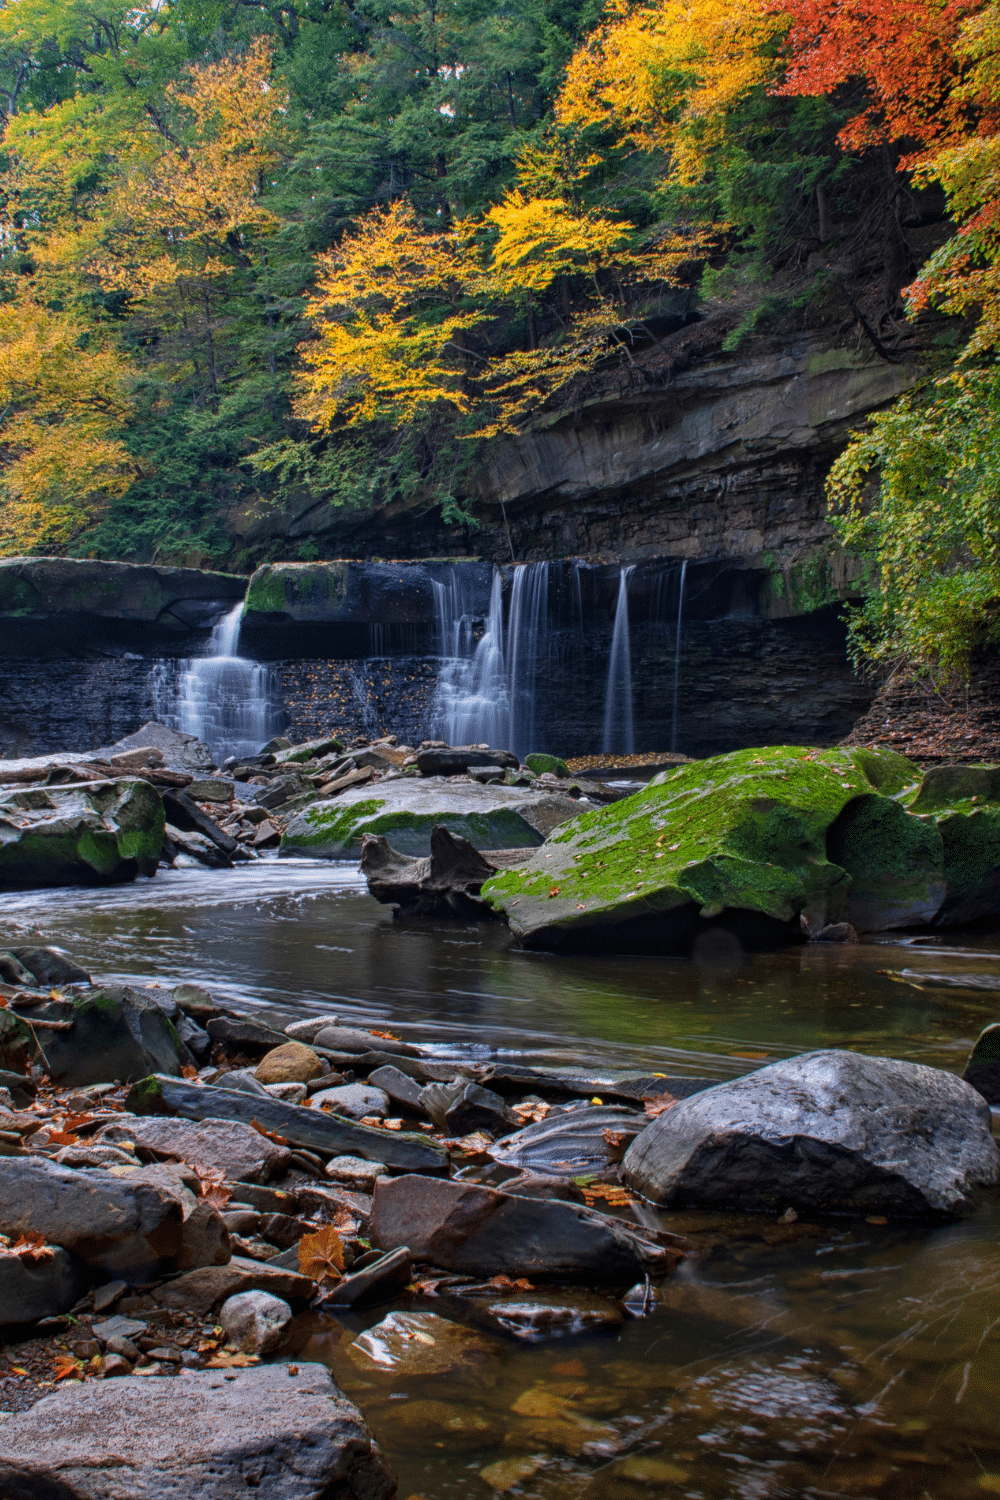 An image of the Great Falls Of Tinker's Creek waterfall. Colourful trees with yellow, orange and green leaves surround the waterfall